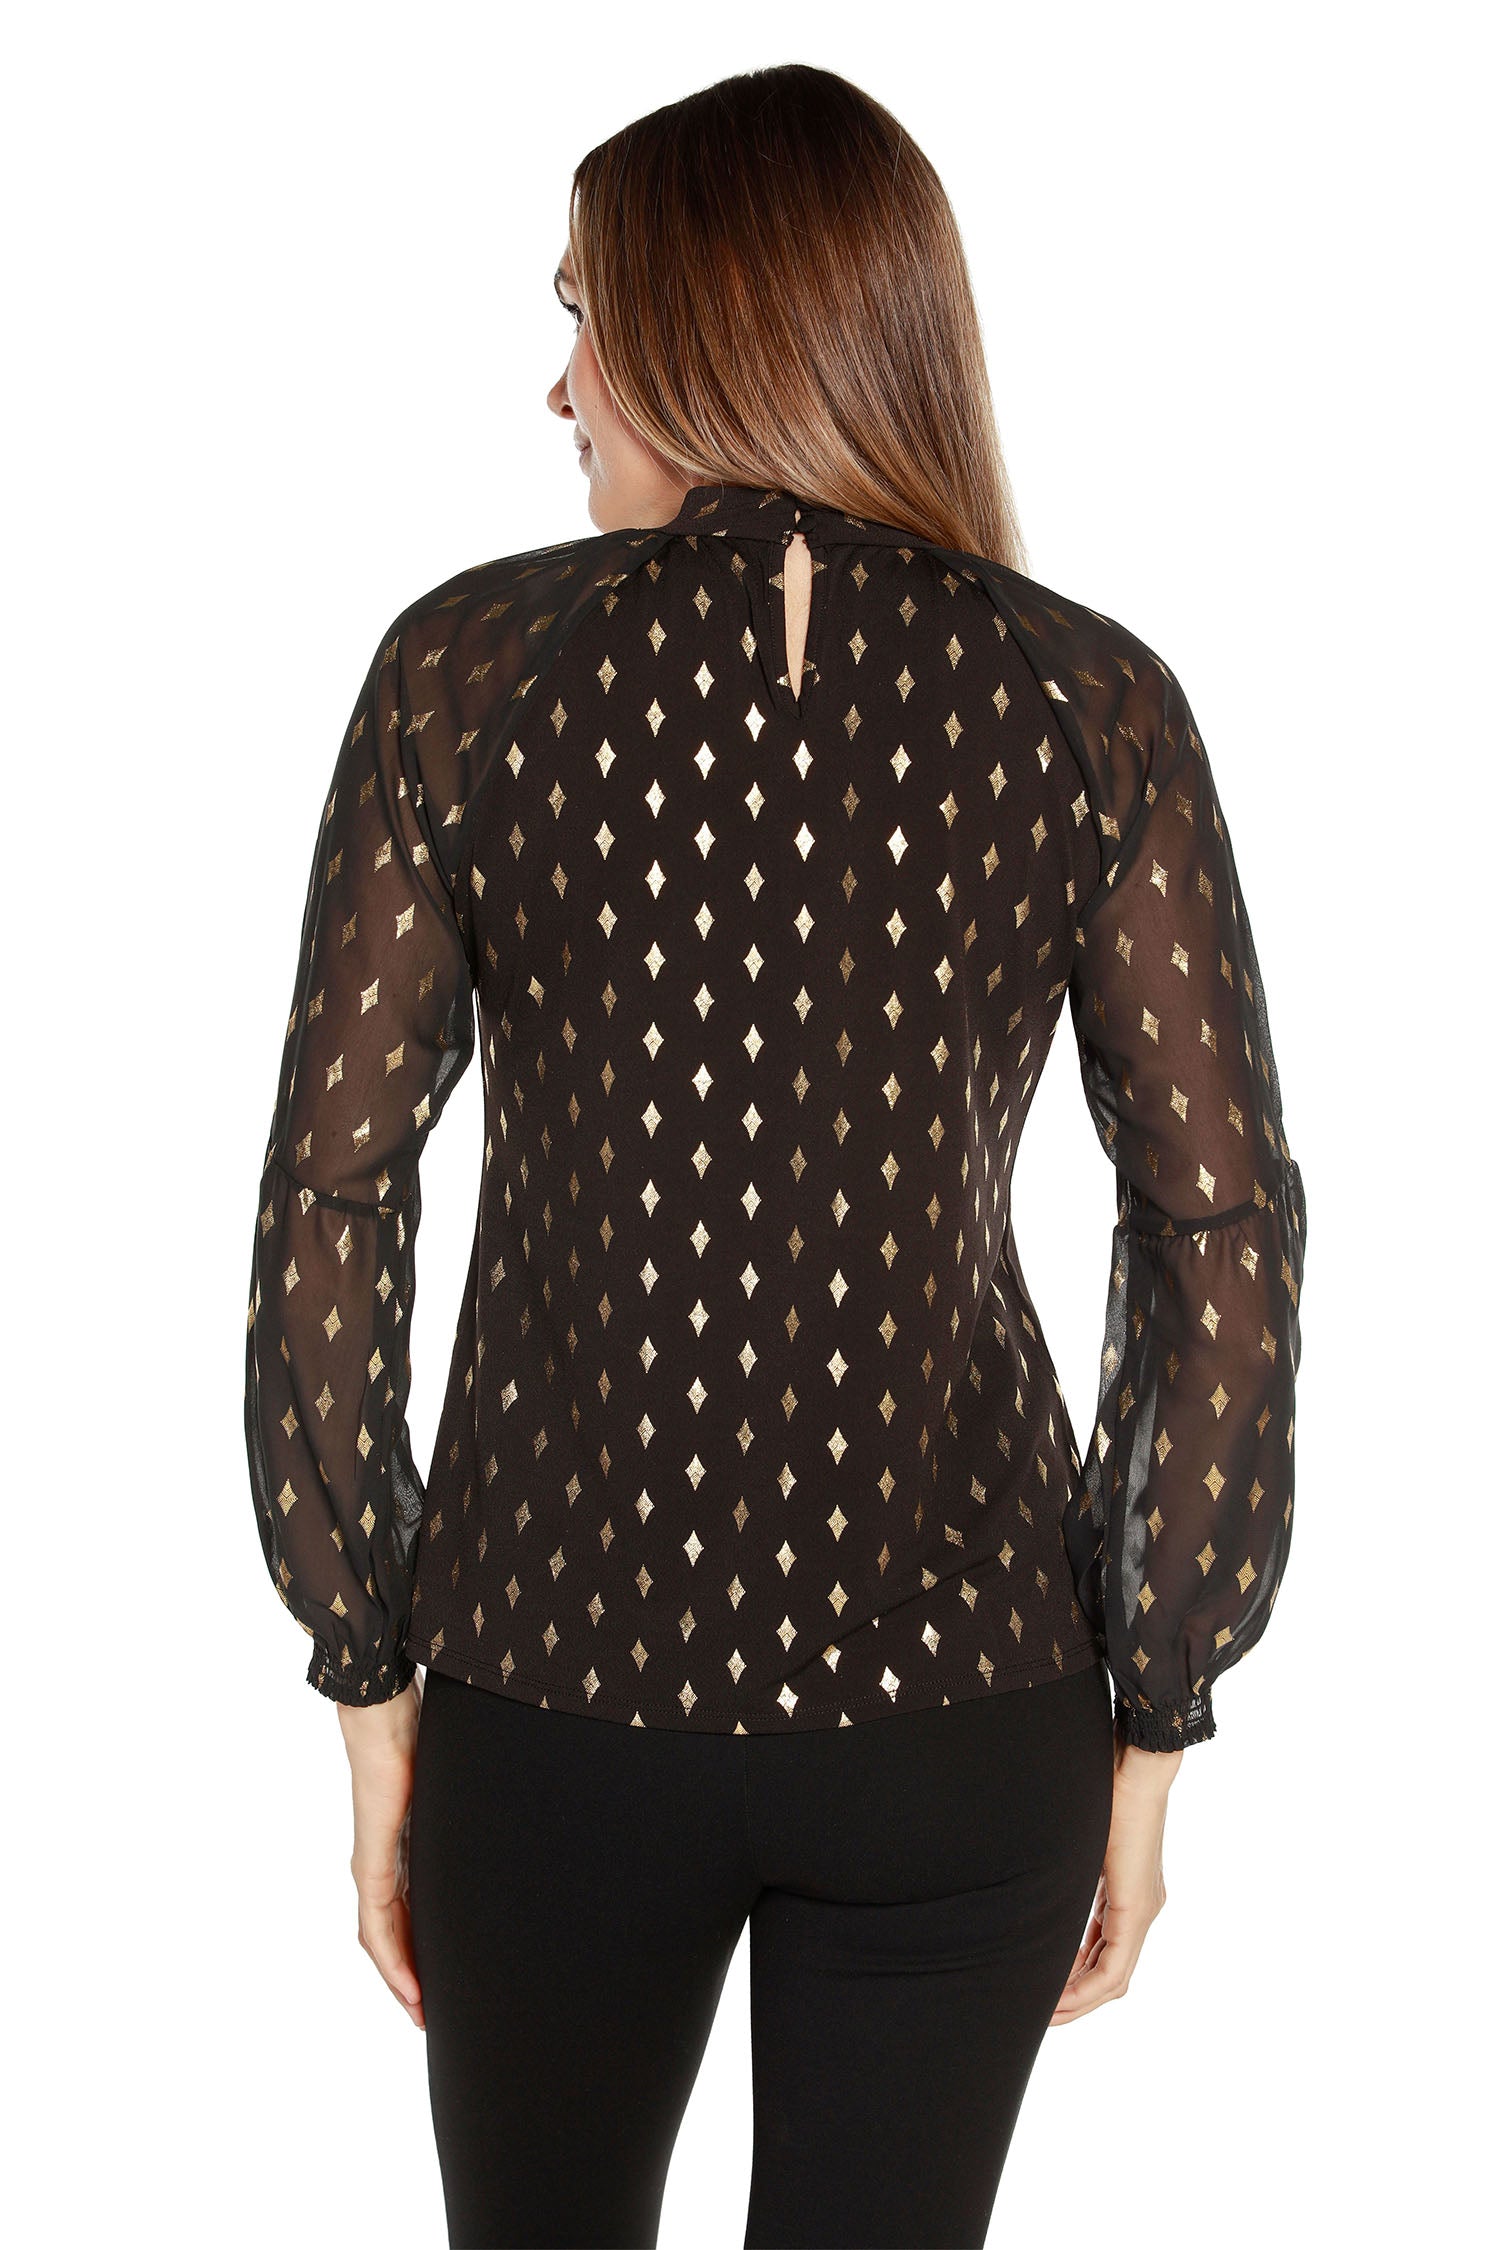 Women's Long Sleeve Tunic With Sheer Sleeves and Front Keyhole in a Gold Diamond Foil Print